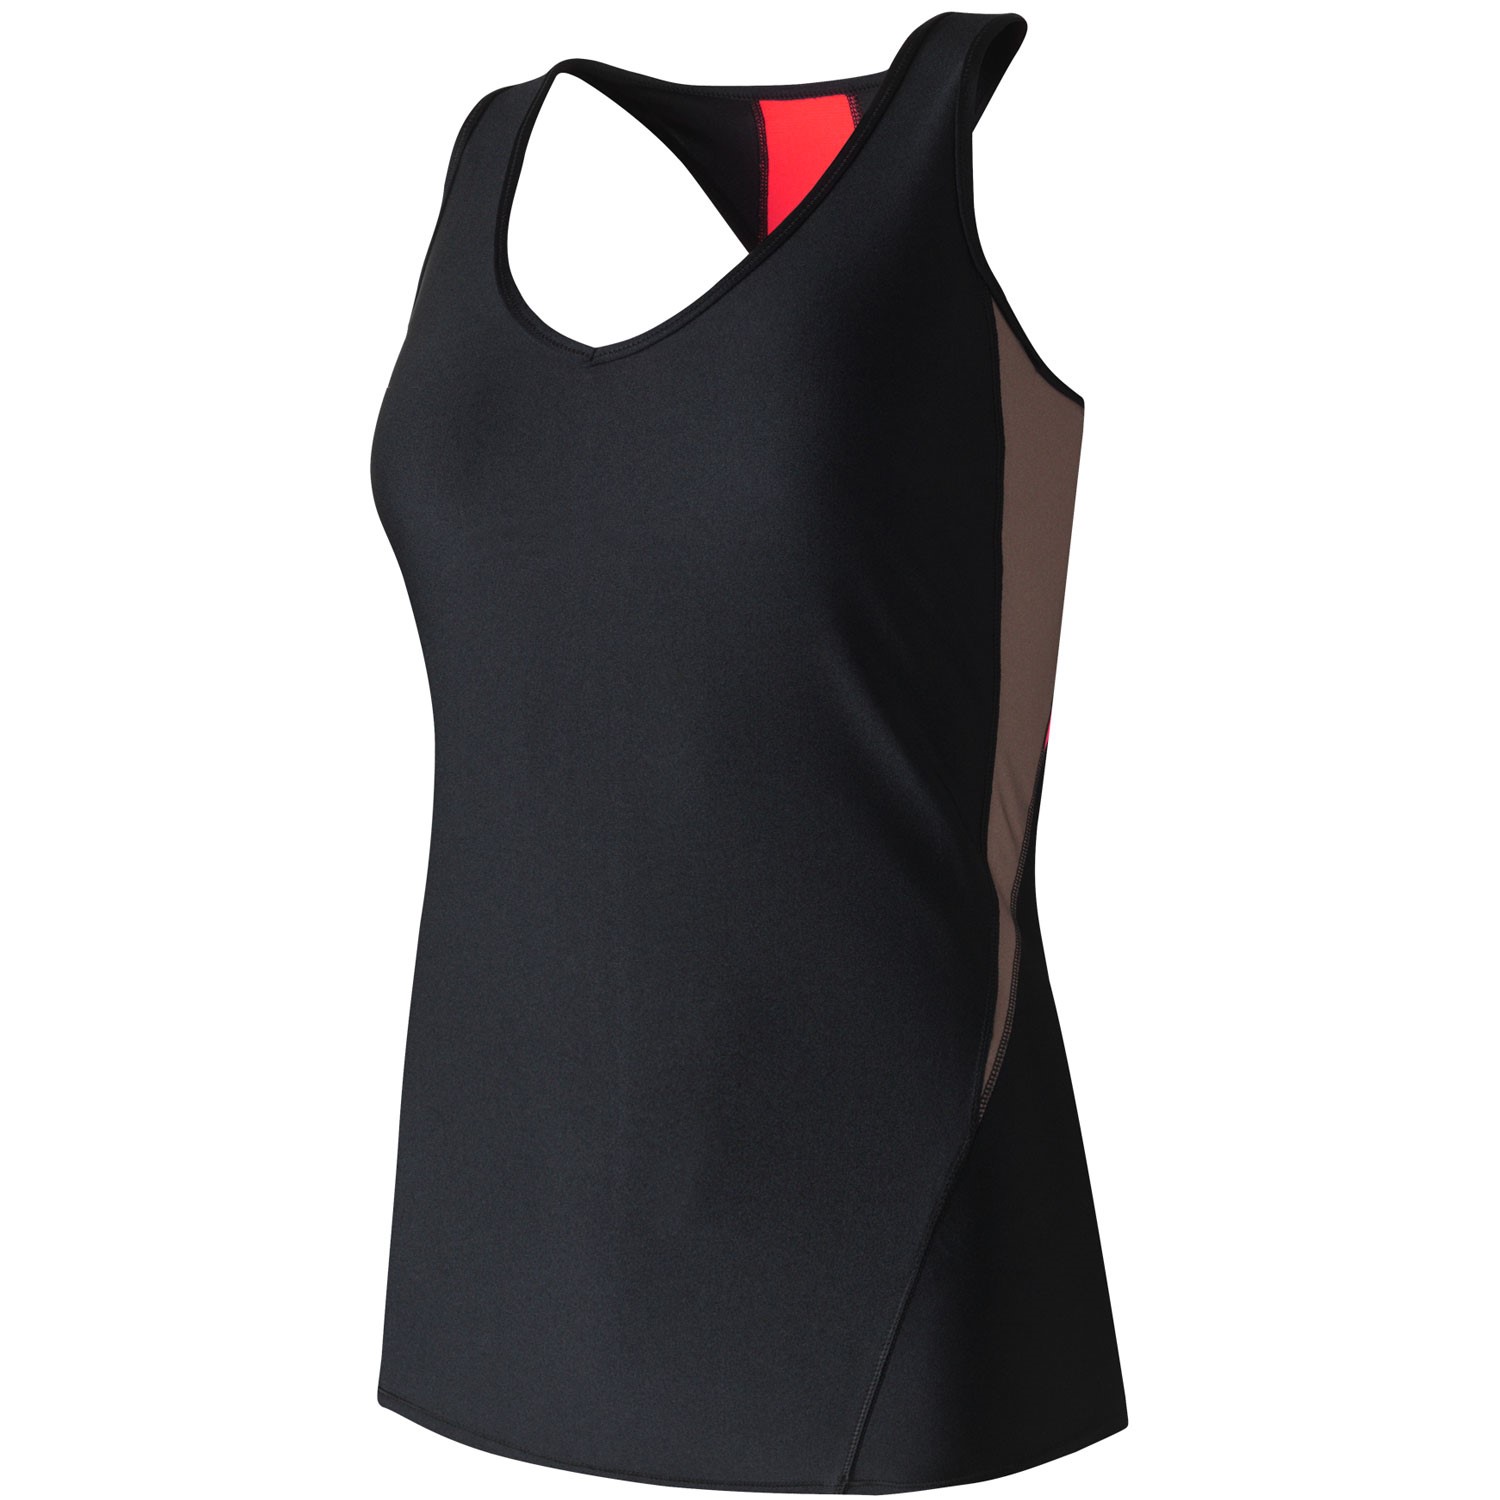 Casall Synthesis Racerback